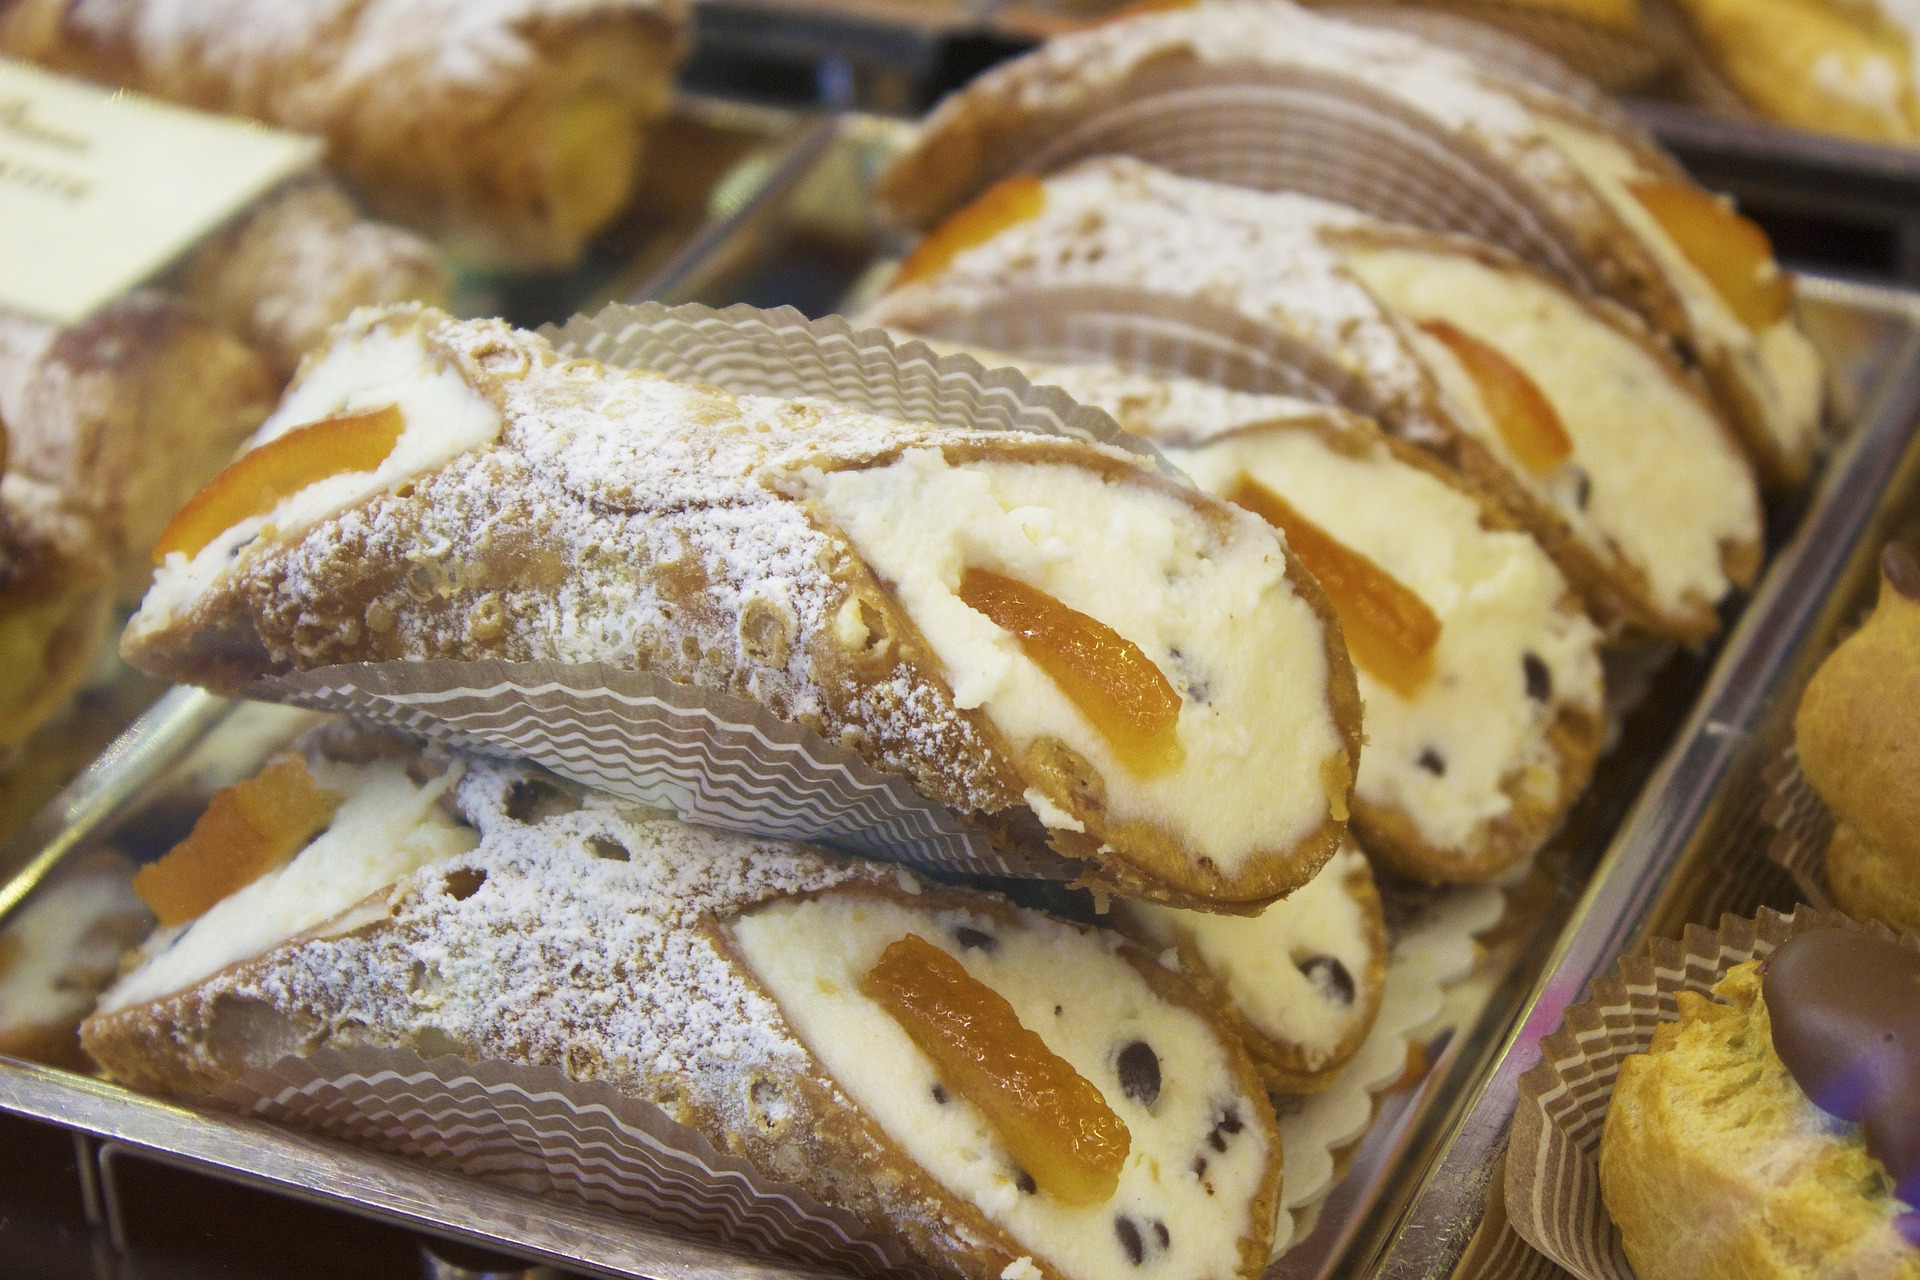 SICILIAN SWEETS TO EAT AT LEAST ONCE IN A LIFETIME